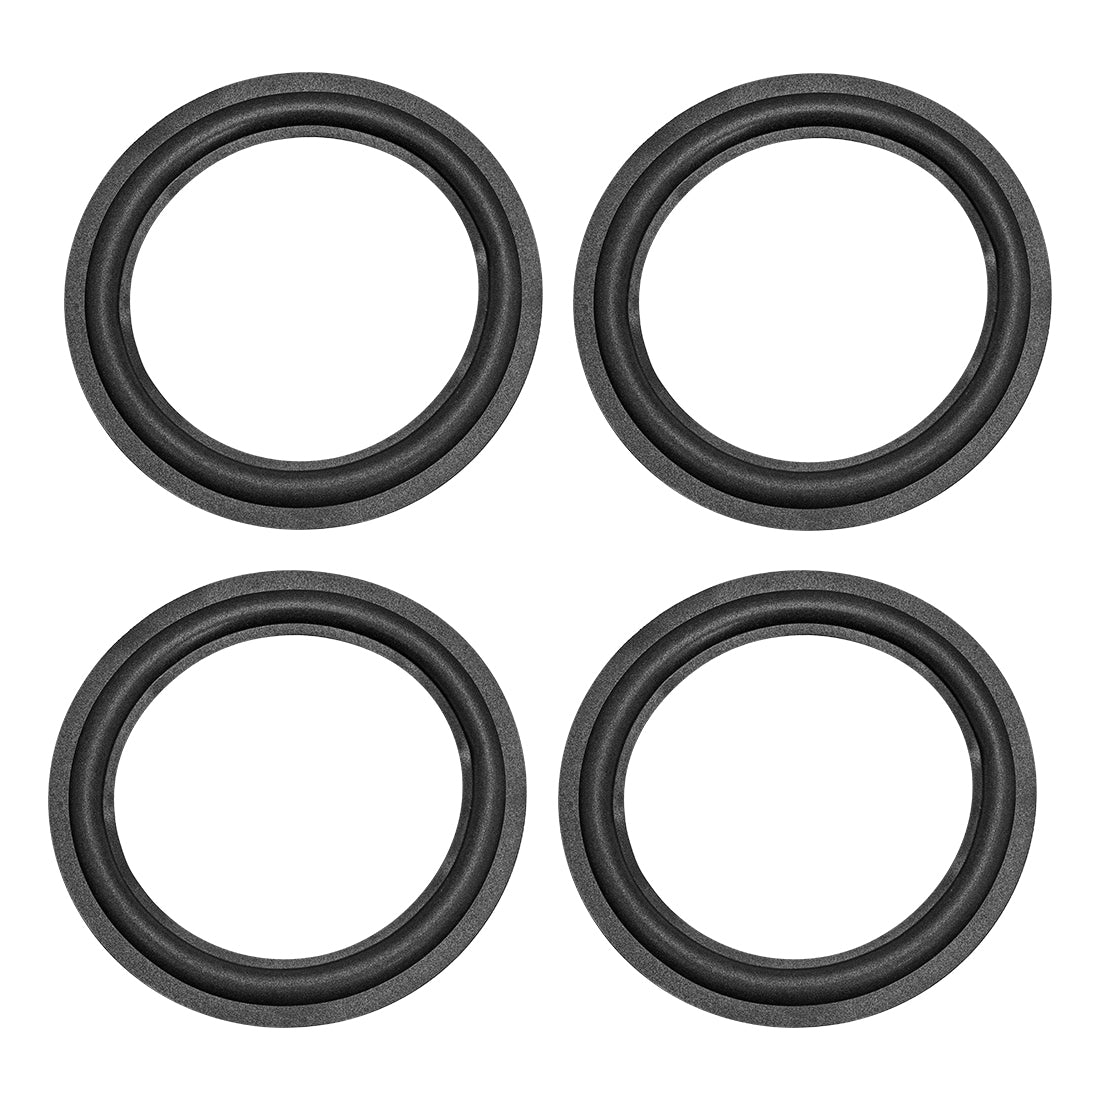 uxcell Uxcell 155mm Speaker Foam Edge Surround Replacement Part for Speaker Repair or DIY  4pcs